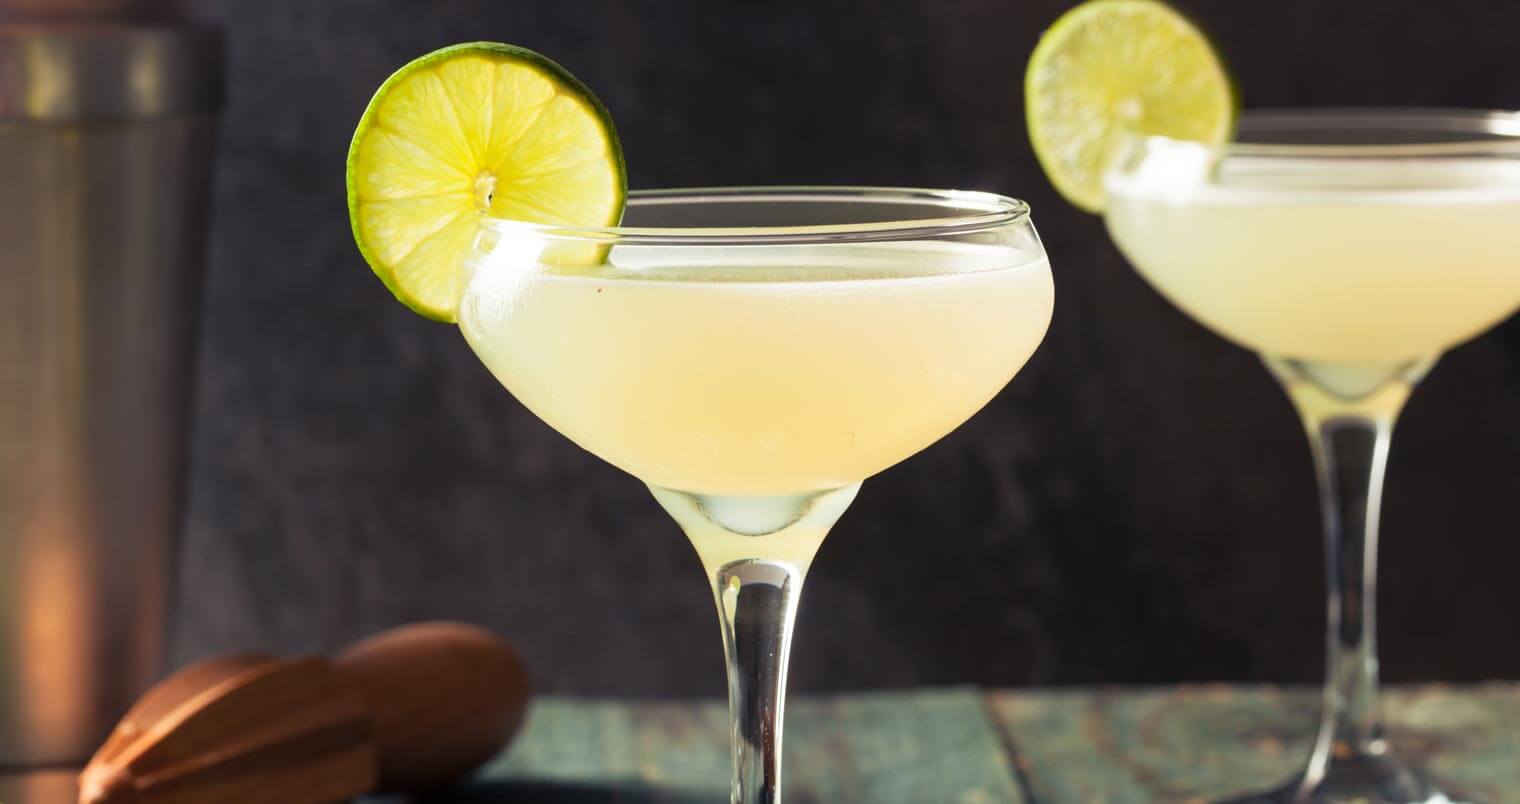 Classic Daiquiri cocktails with lime wheel garnish, featured image